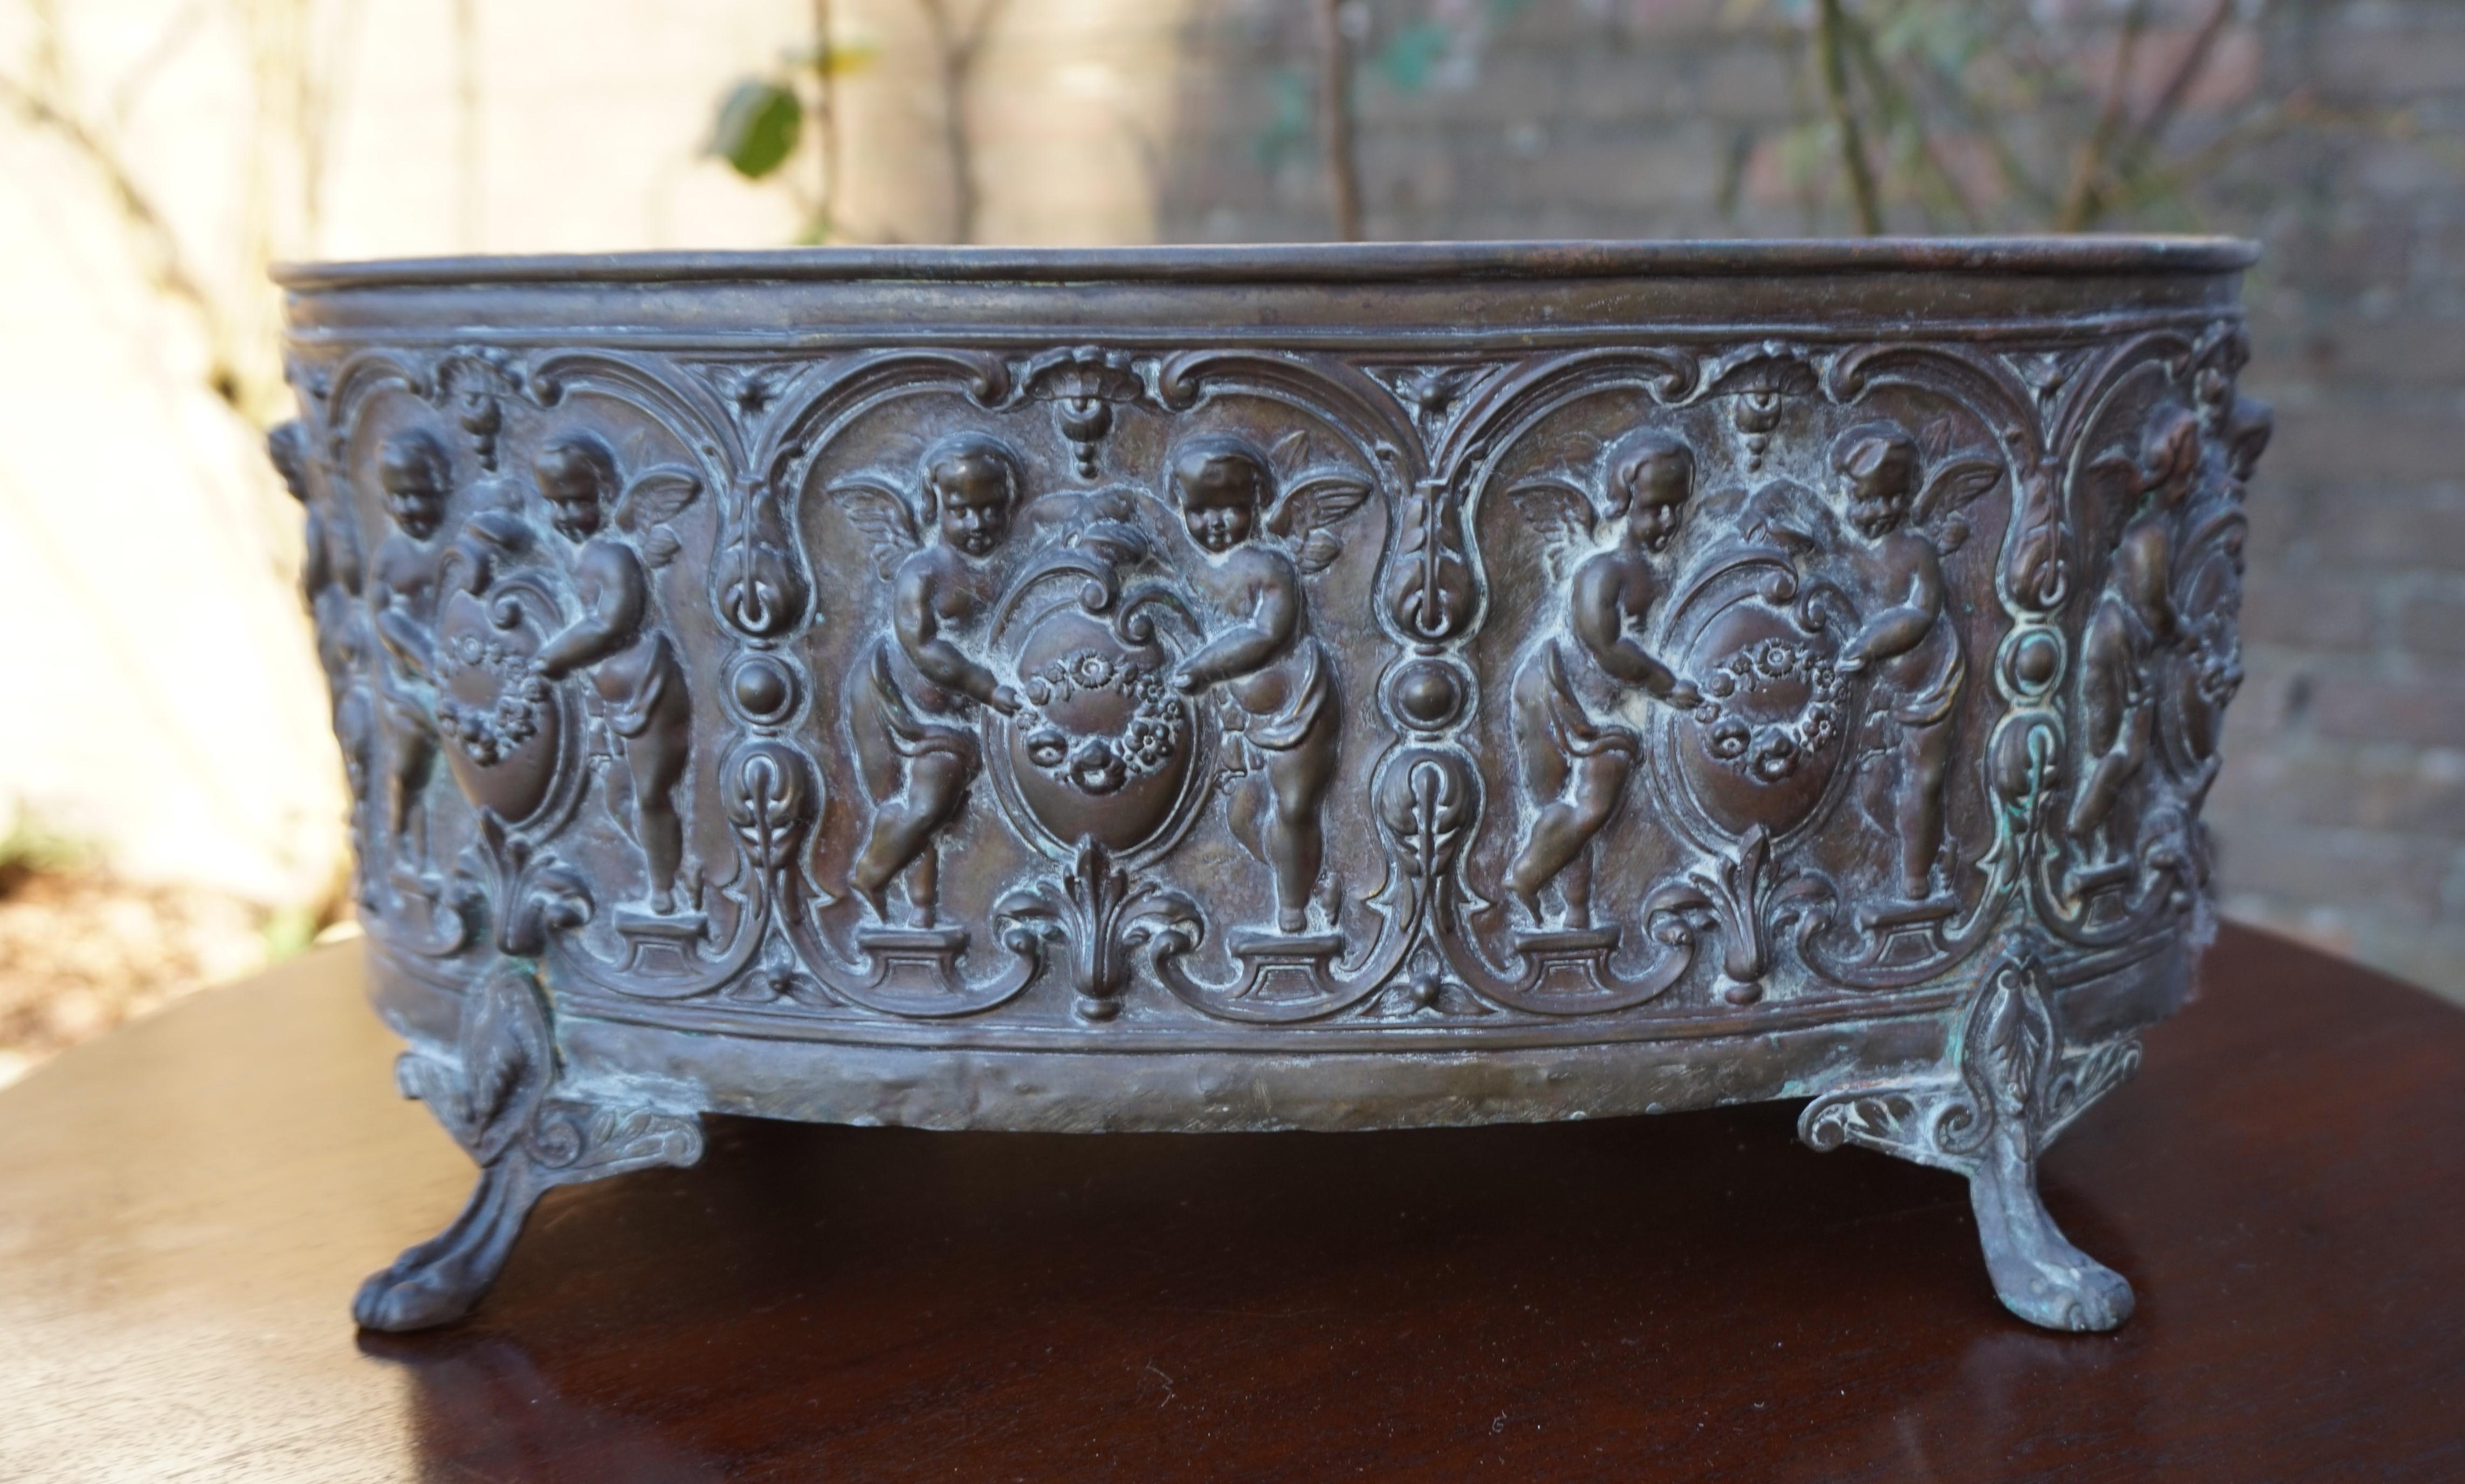 Hand-crafted and highly decorative, Renaissance Revival copper planter.

This antique jardiniere is another great example of how mid 19th century workmanship created stunning home accessories for the very well to do of that era. Mind you, the time